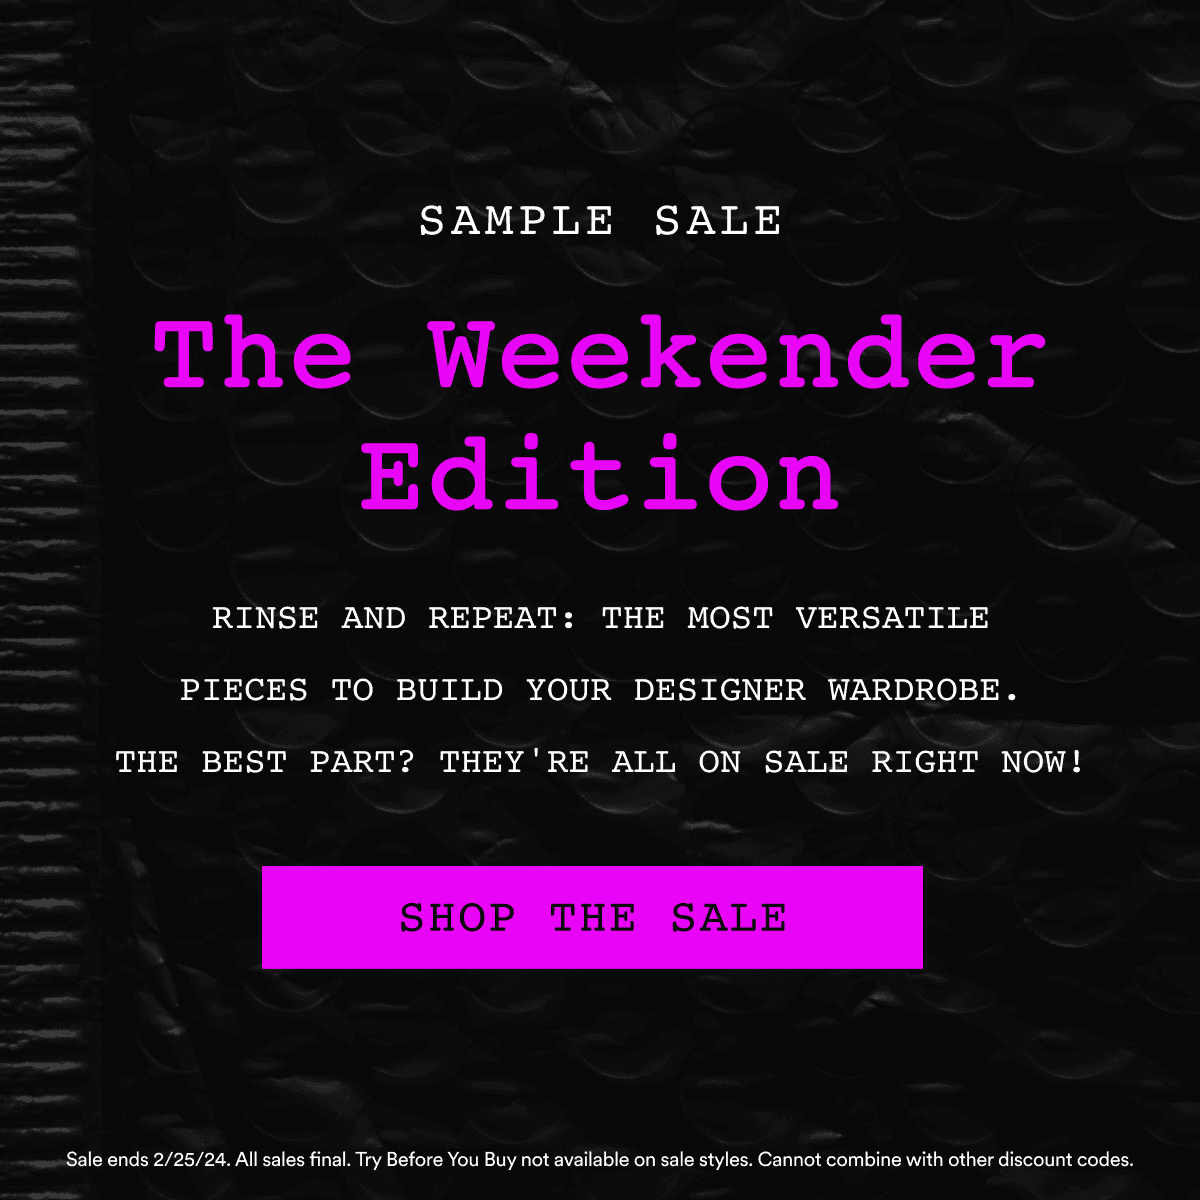 Sample Sale. The Weekender Edition. RINSE AND REPEAT: THE MOST VERSATILE PIECES TO BUILD YOUR DESIGNER WARDROBE. THE BEST PART? THEY'RE ALL ON SALE RIGHT NOW! Shop The Sale